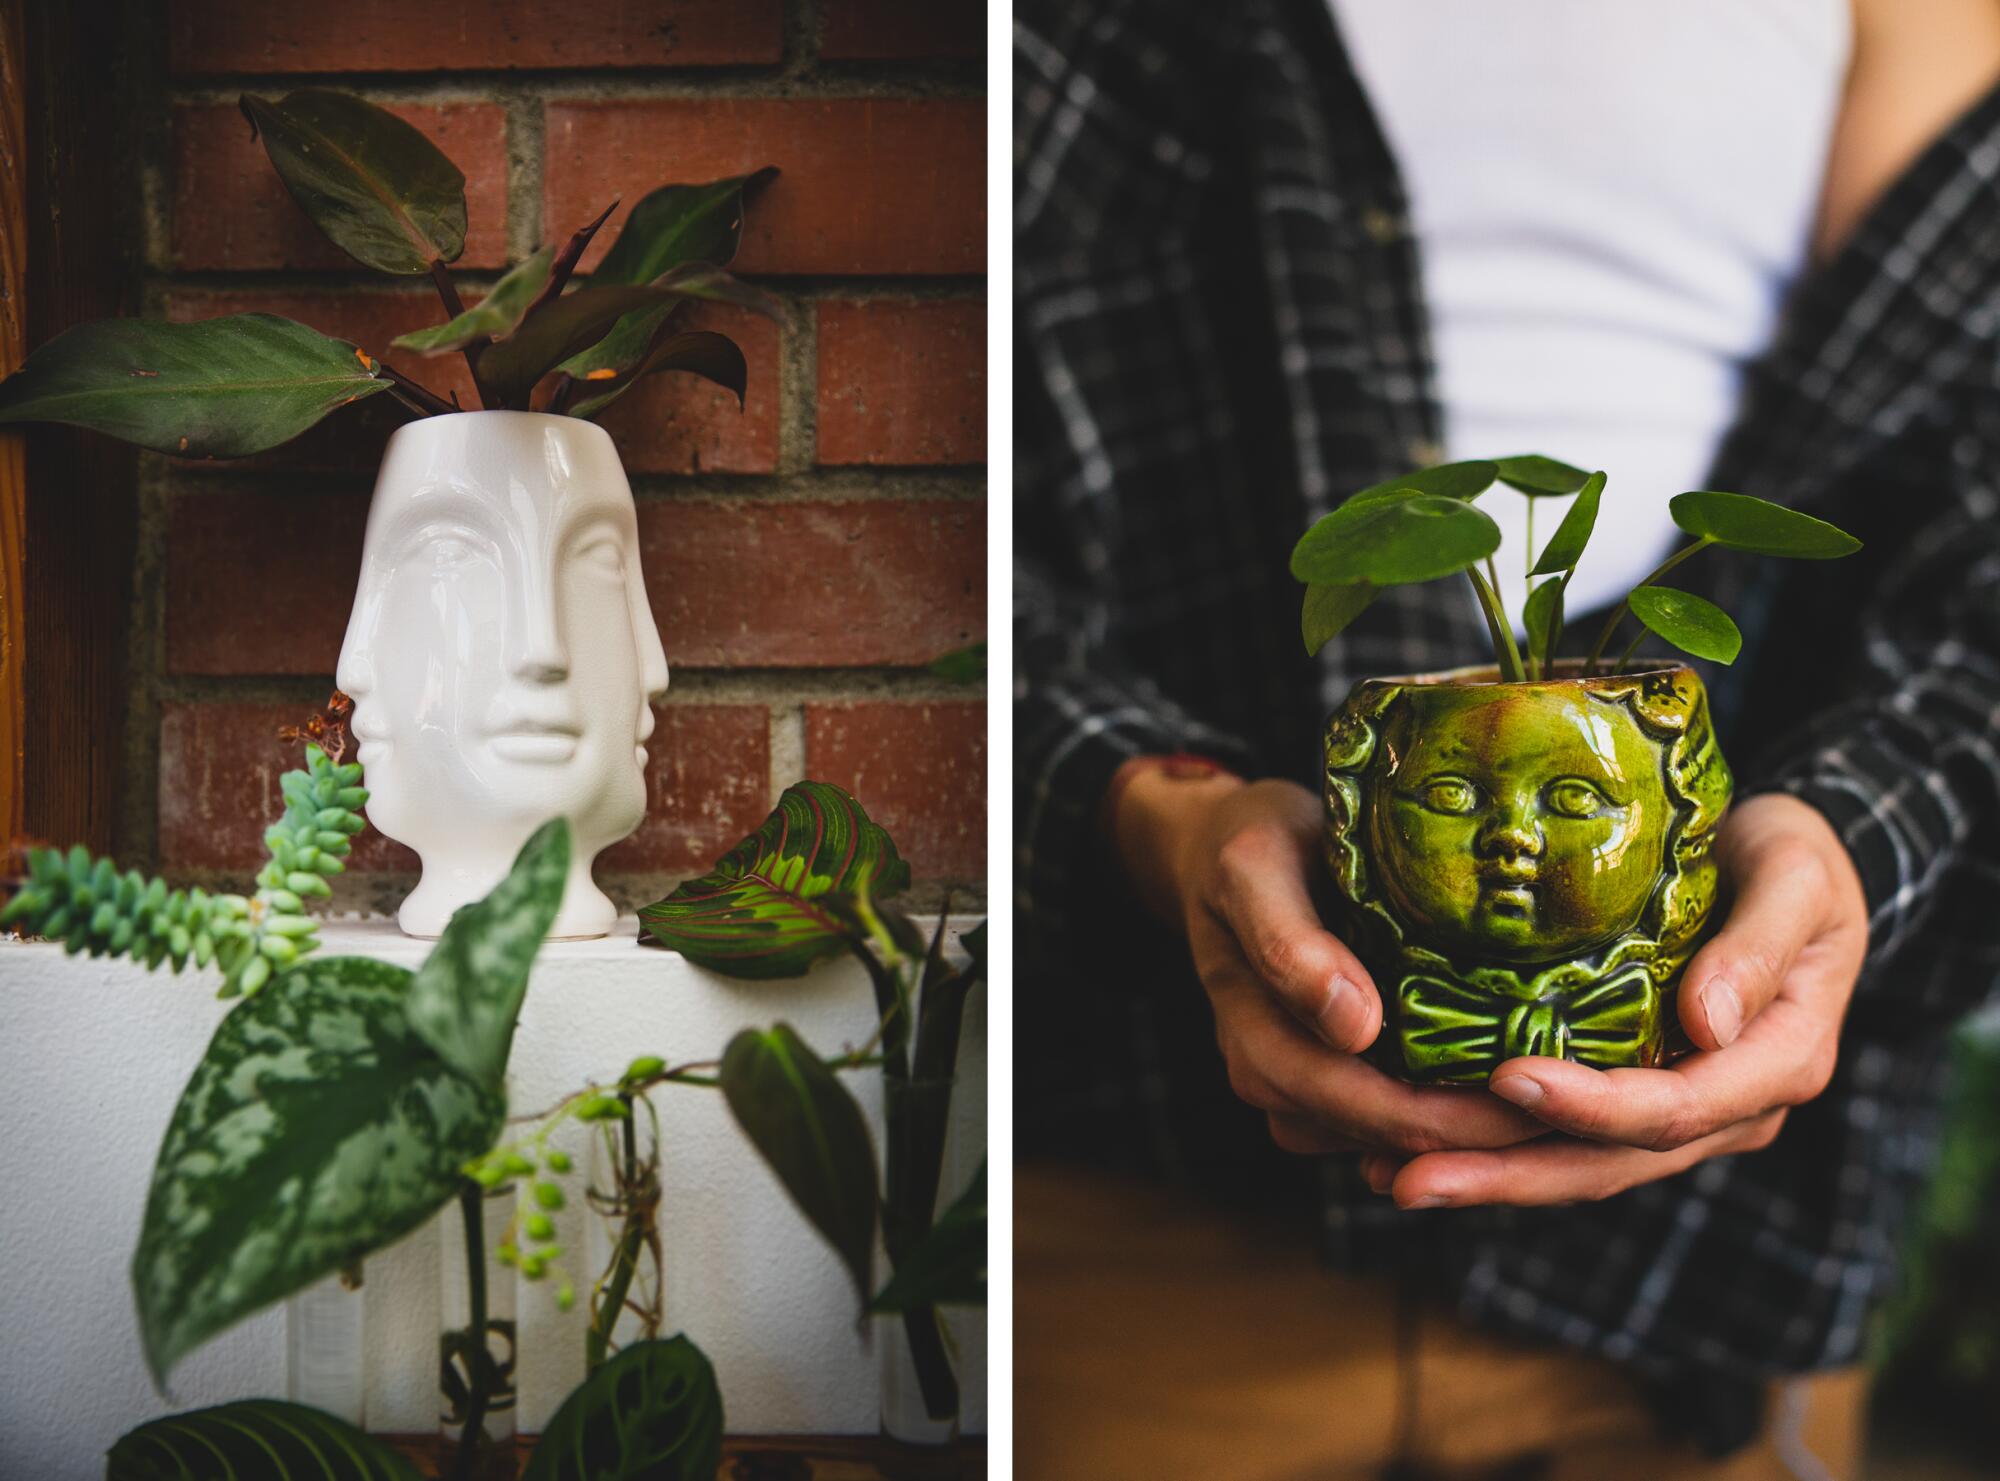 Two pots in the shape of faces, one white and one green, hold plants.